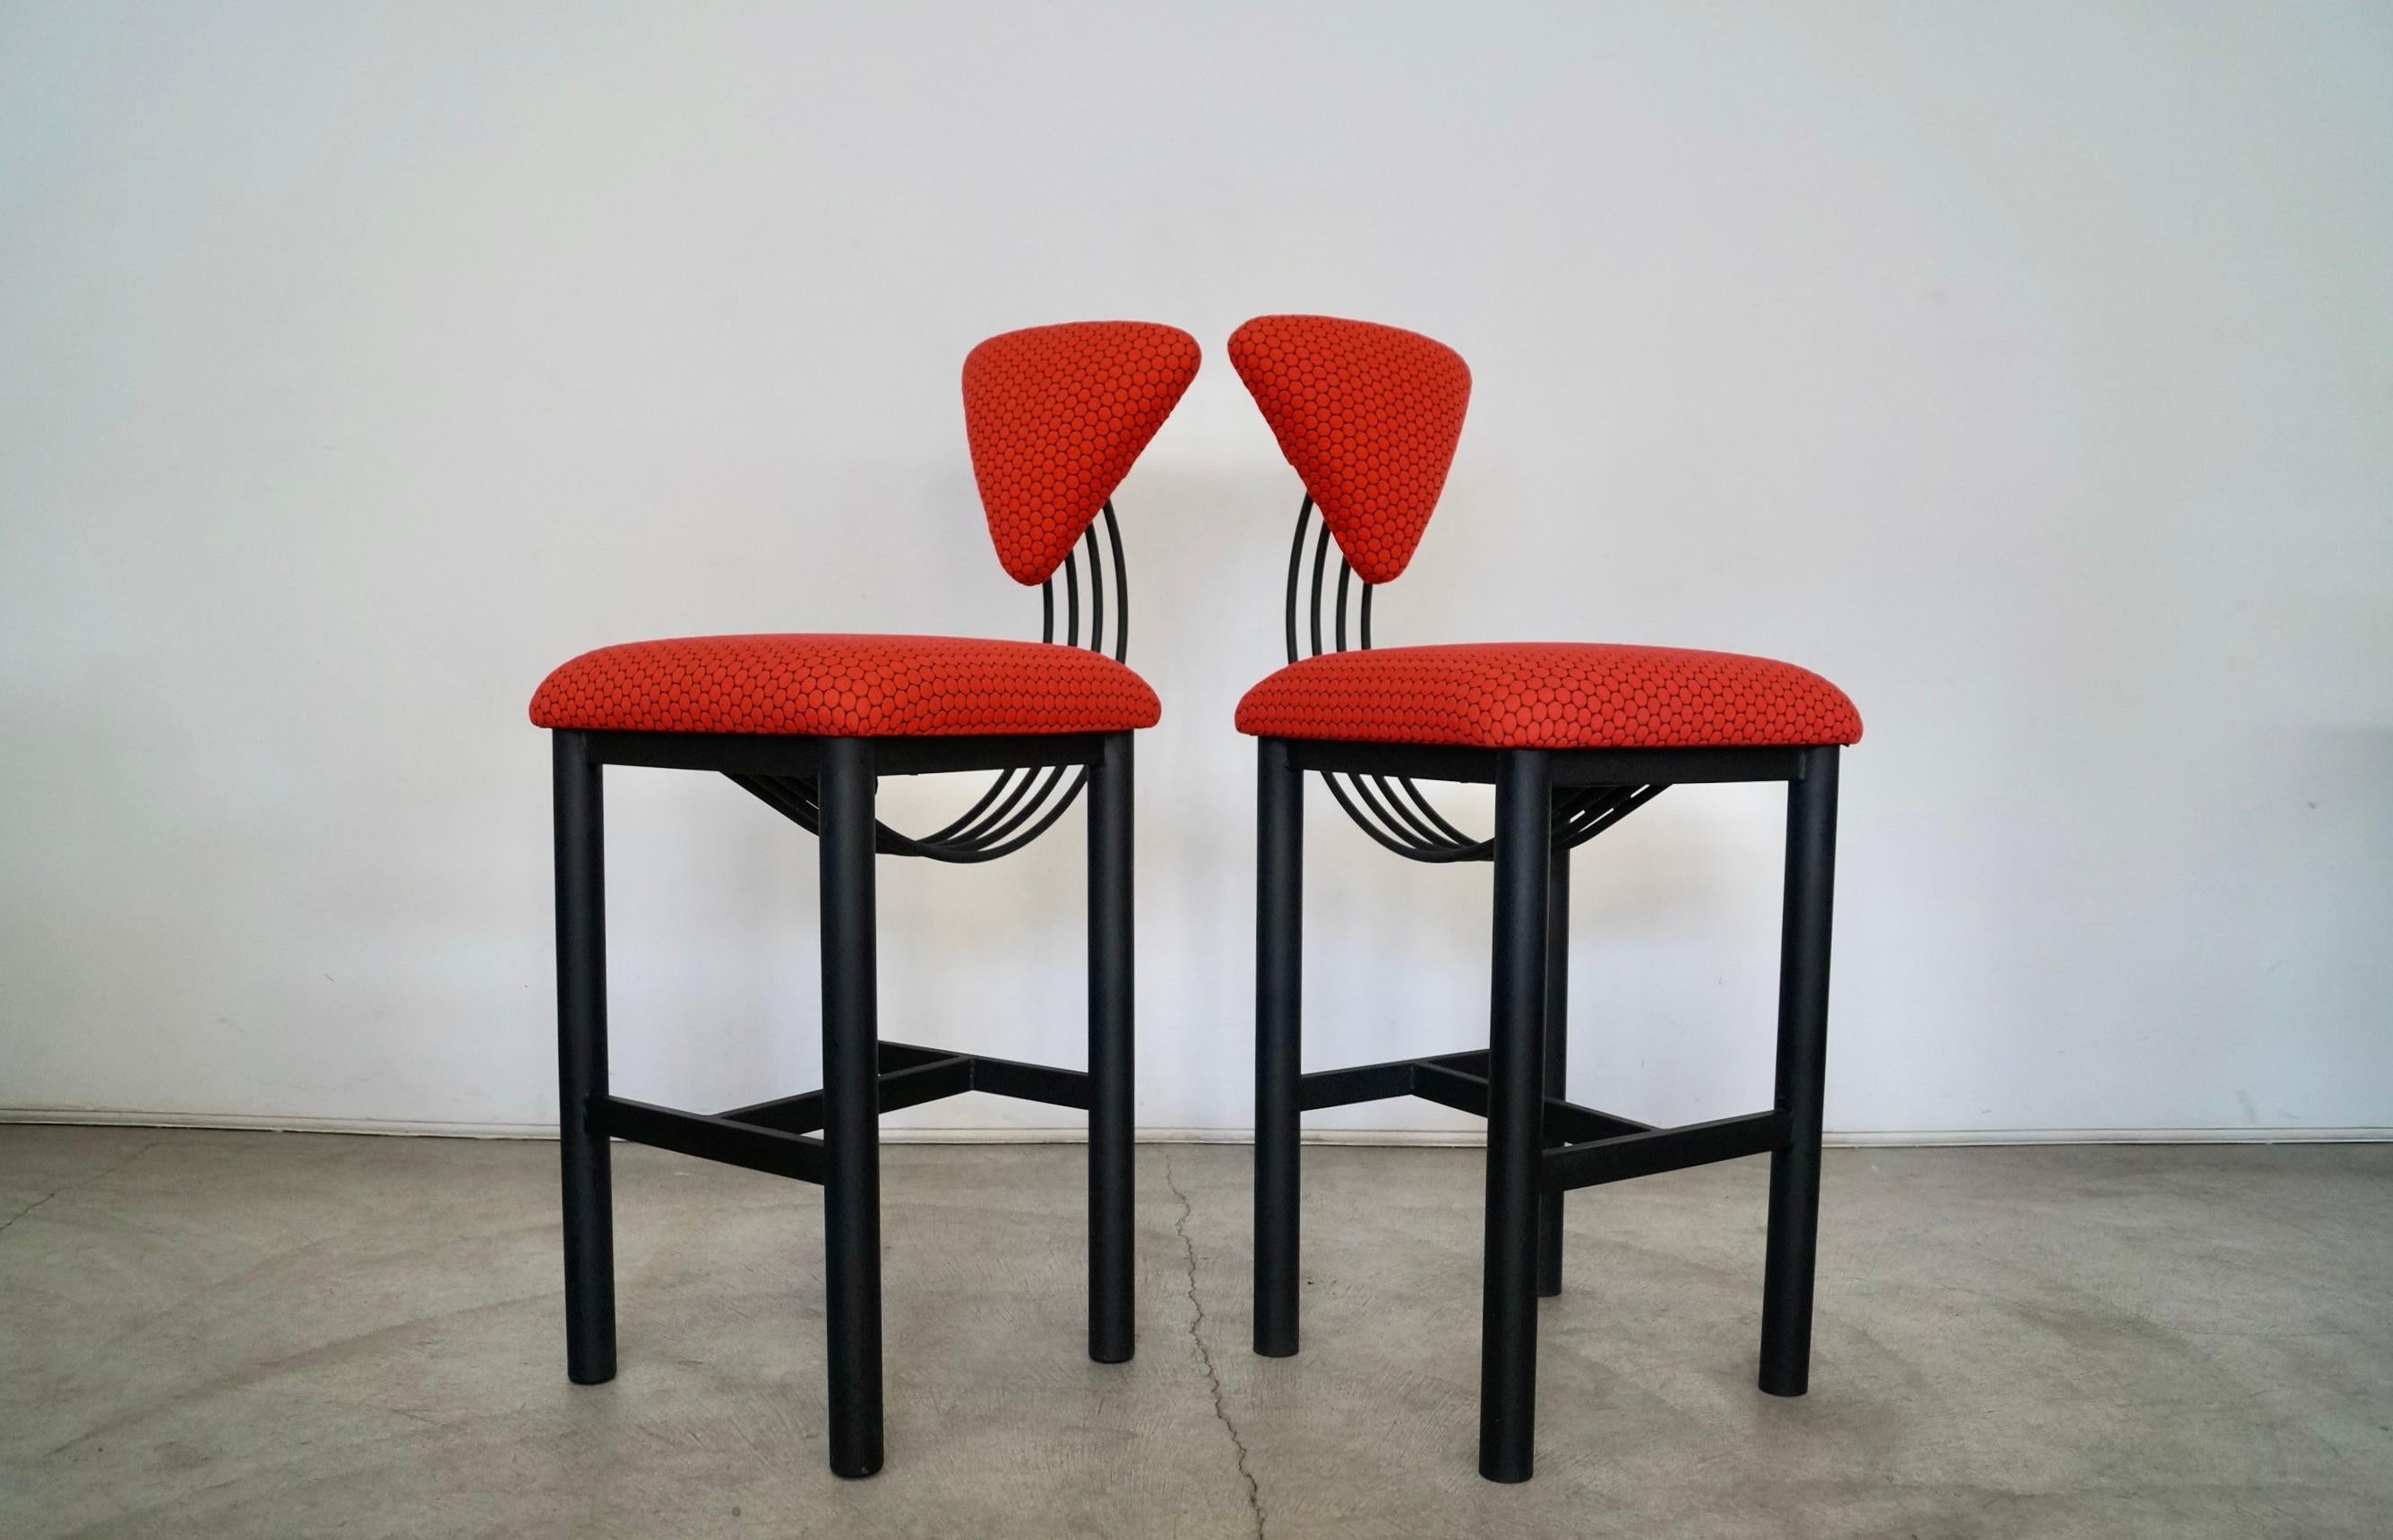 1980s Postmodern Memphis Style Bar Stools In Excellent Condition For Sale In Burbank, CA